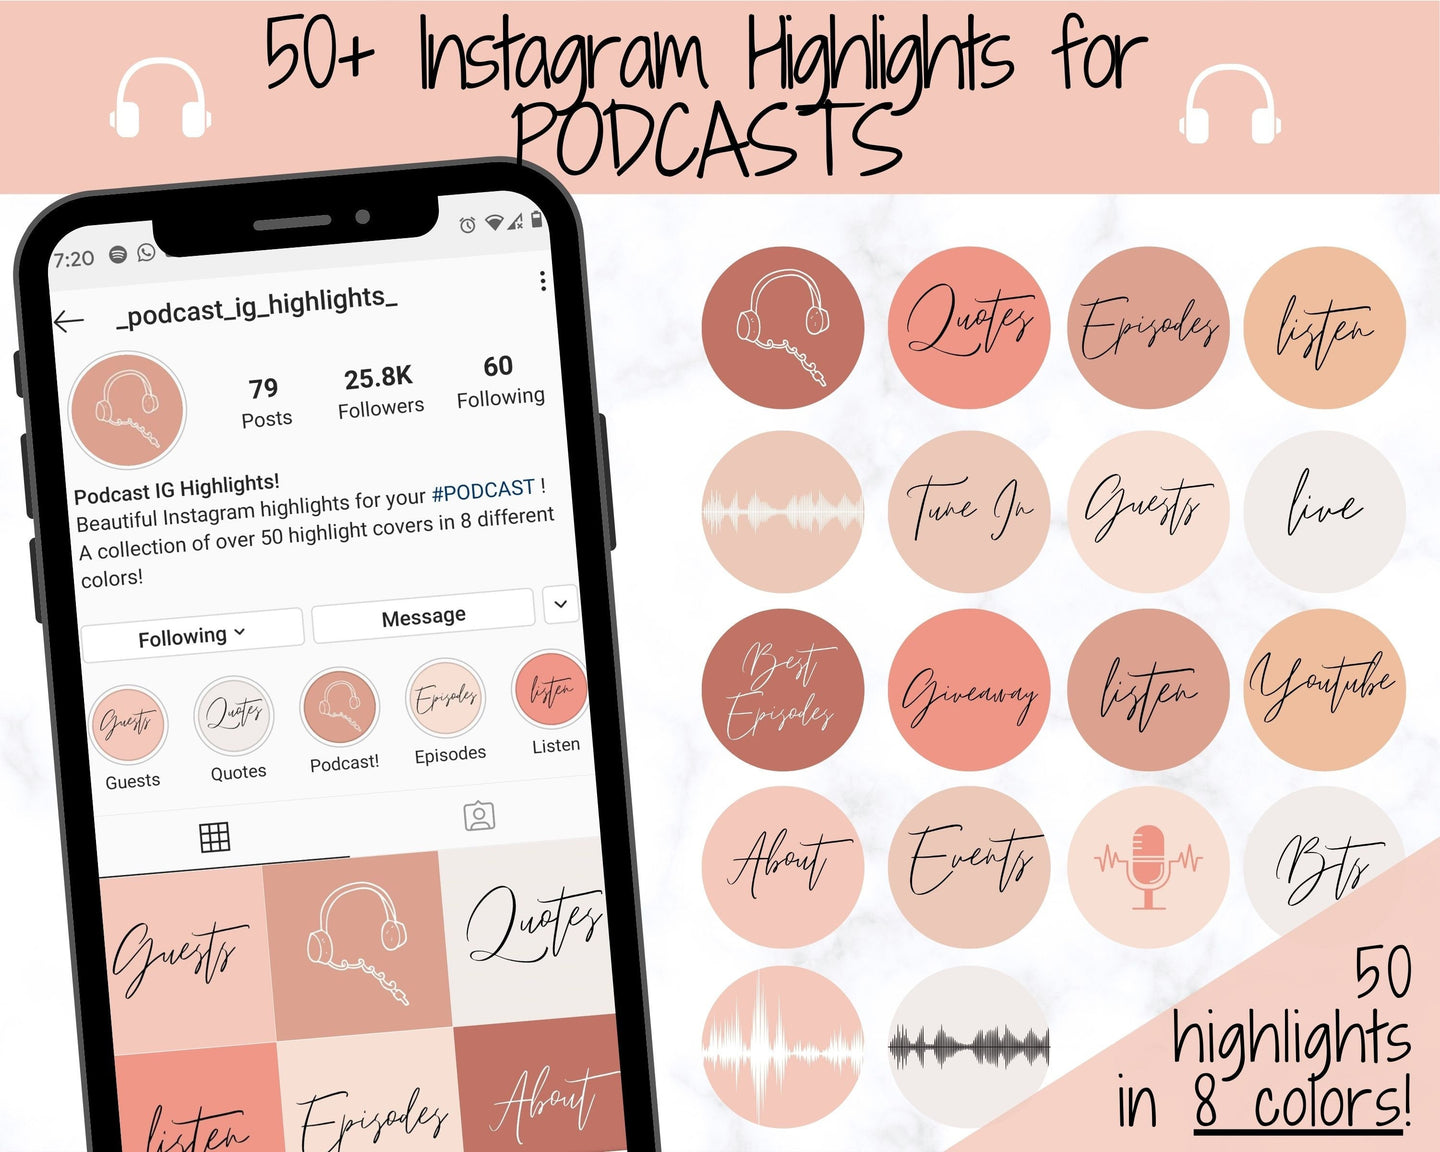 Podcast Instagram Highlight Covers, 50 Icons, Nude Handwritten Podcasting IG Highlights, Blush Insta Story Covers, Text, Stories, IG Feed | Nude